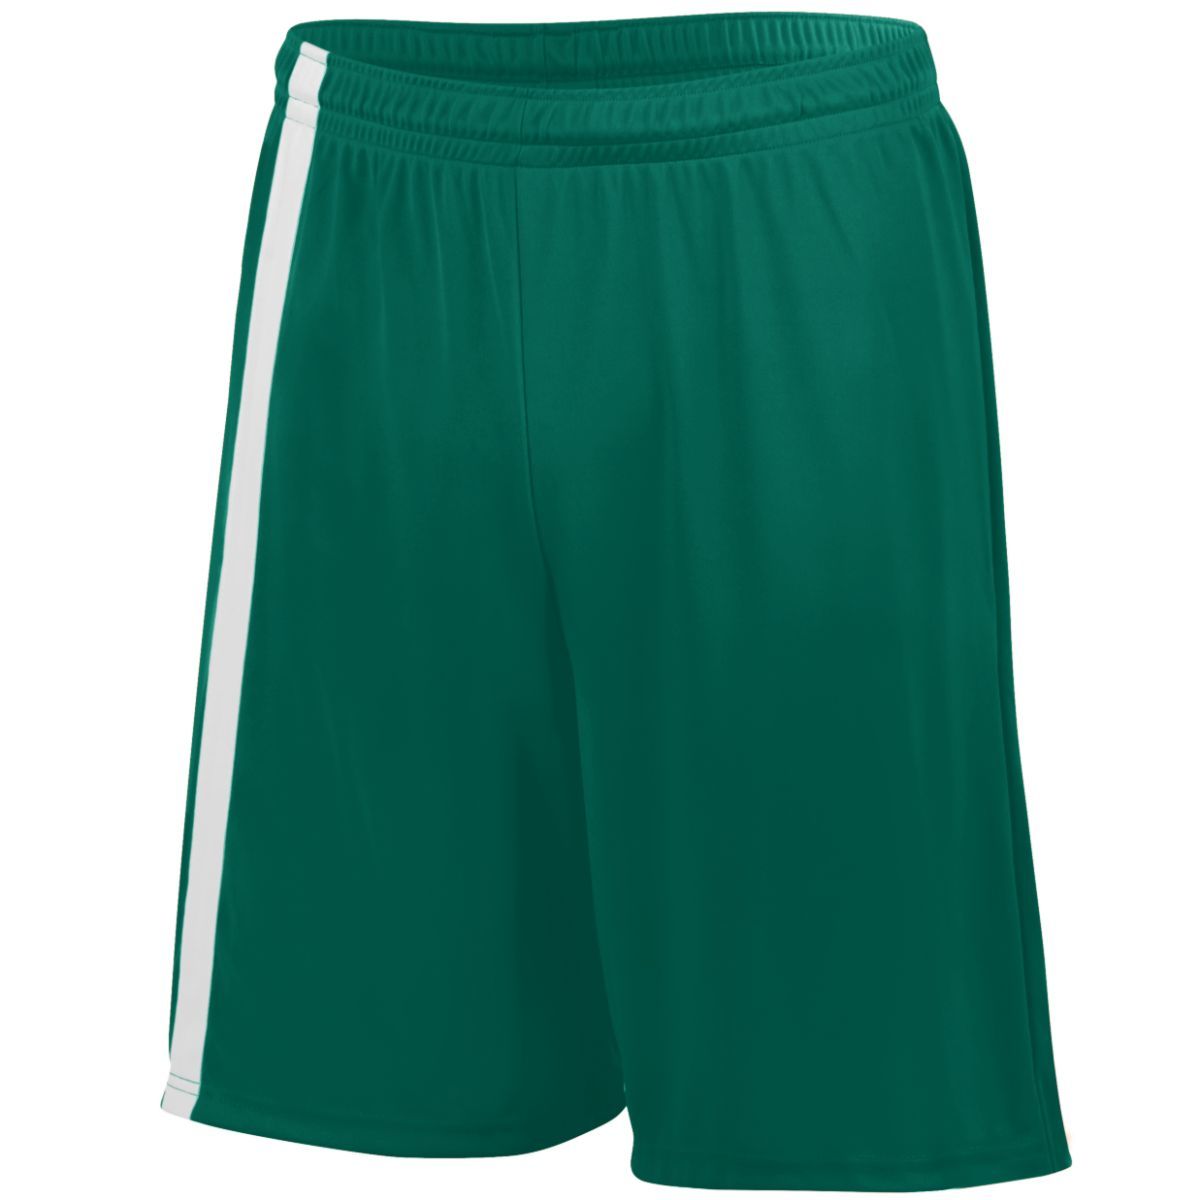 Augusta Sportswear Youth Attacking Third Shorts in Dark Green/White  -Part of the Youth, Youth-Shorts, Augusta-Products, Soccer, All-Sports-1 product lines at KanaleyCreations.com